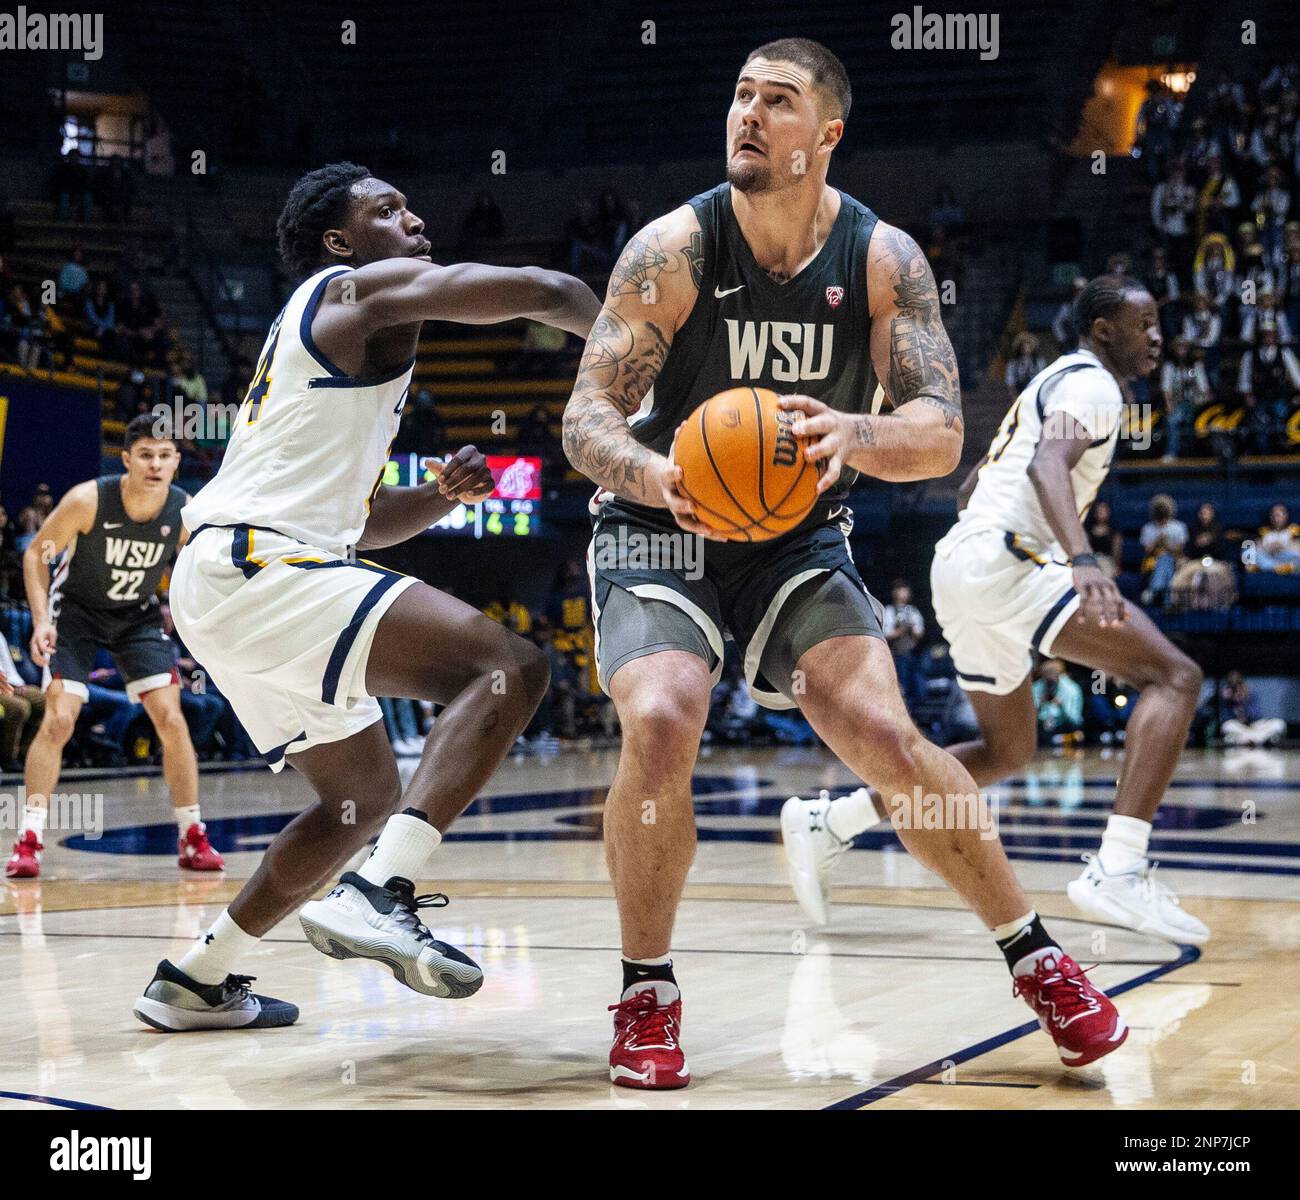 berkeley-ca-us-25th-feb-2023-a-washington-state-center-jack-wilson-21fights-for-position-in-the-paint-during-ncaa-mens-basketball-game-between-washington-state-cougars-and-the-california-golden-bears-washington-state-beat-california-63-57-at-haas-pavilion-berkeley-calif-thurman-jamescsmalamy-live-news-2NP7JCP.jpg